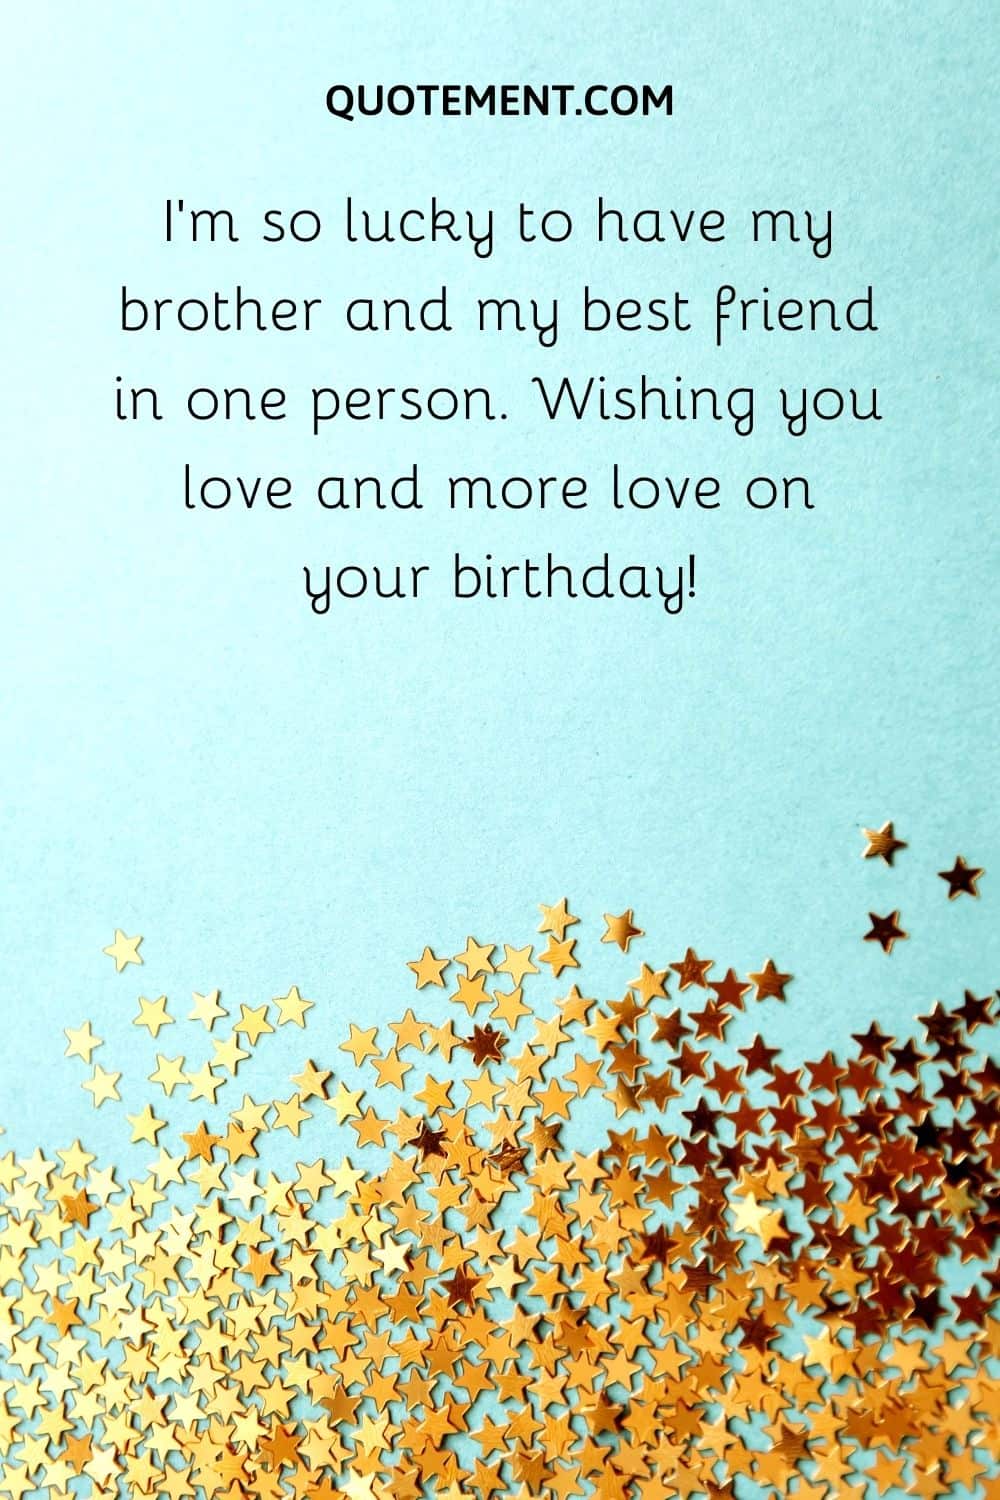 I'm so lucky to have my brother and my best friend in one person. Wishing you love and more love on your birthday!